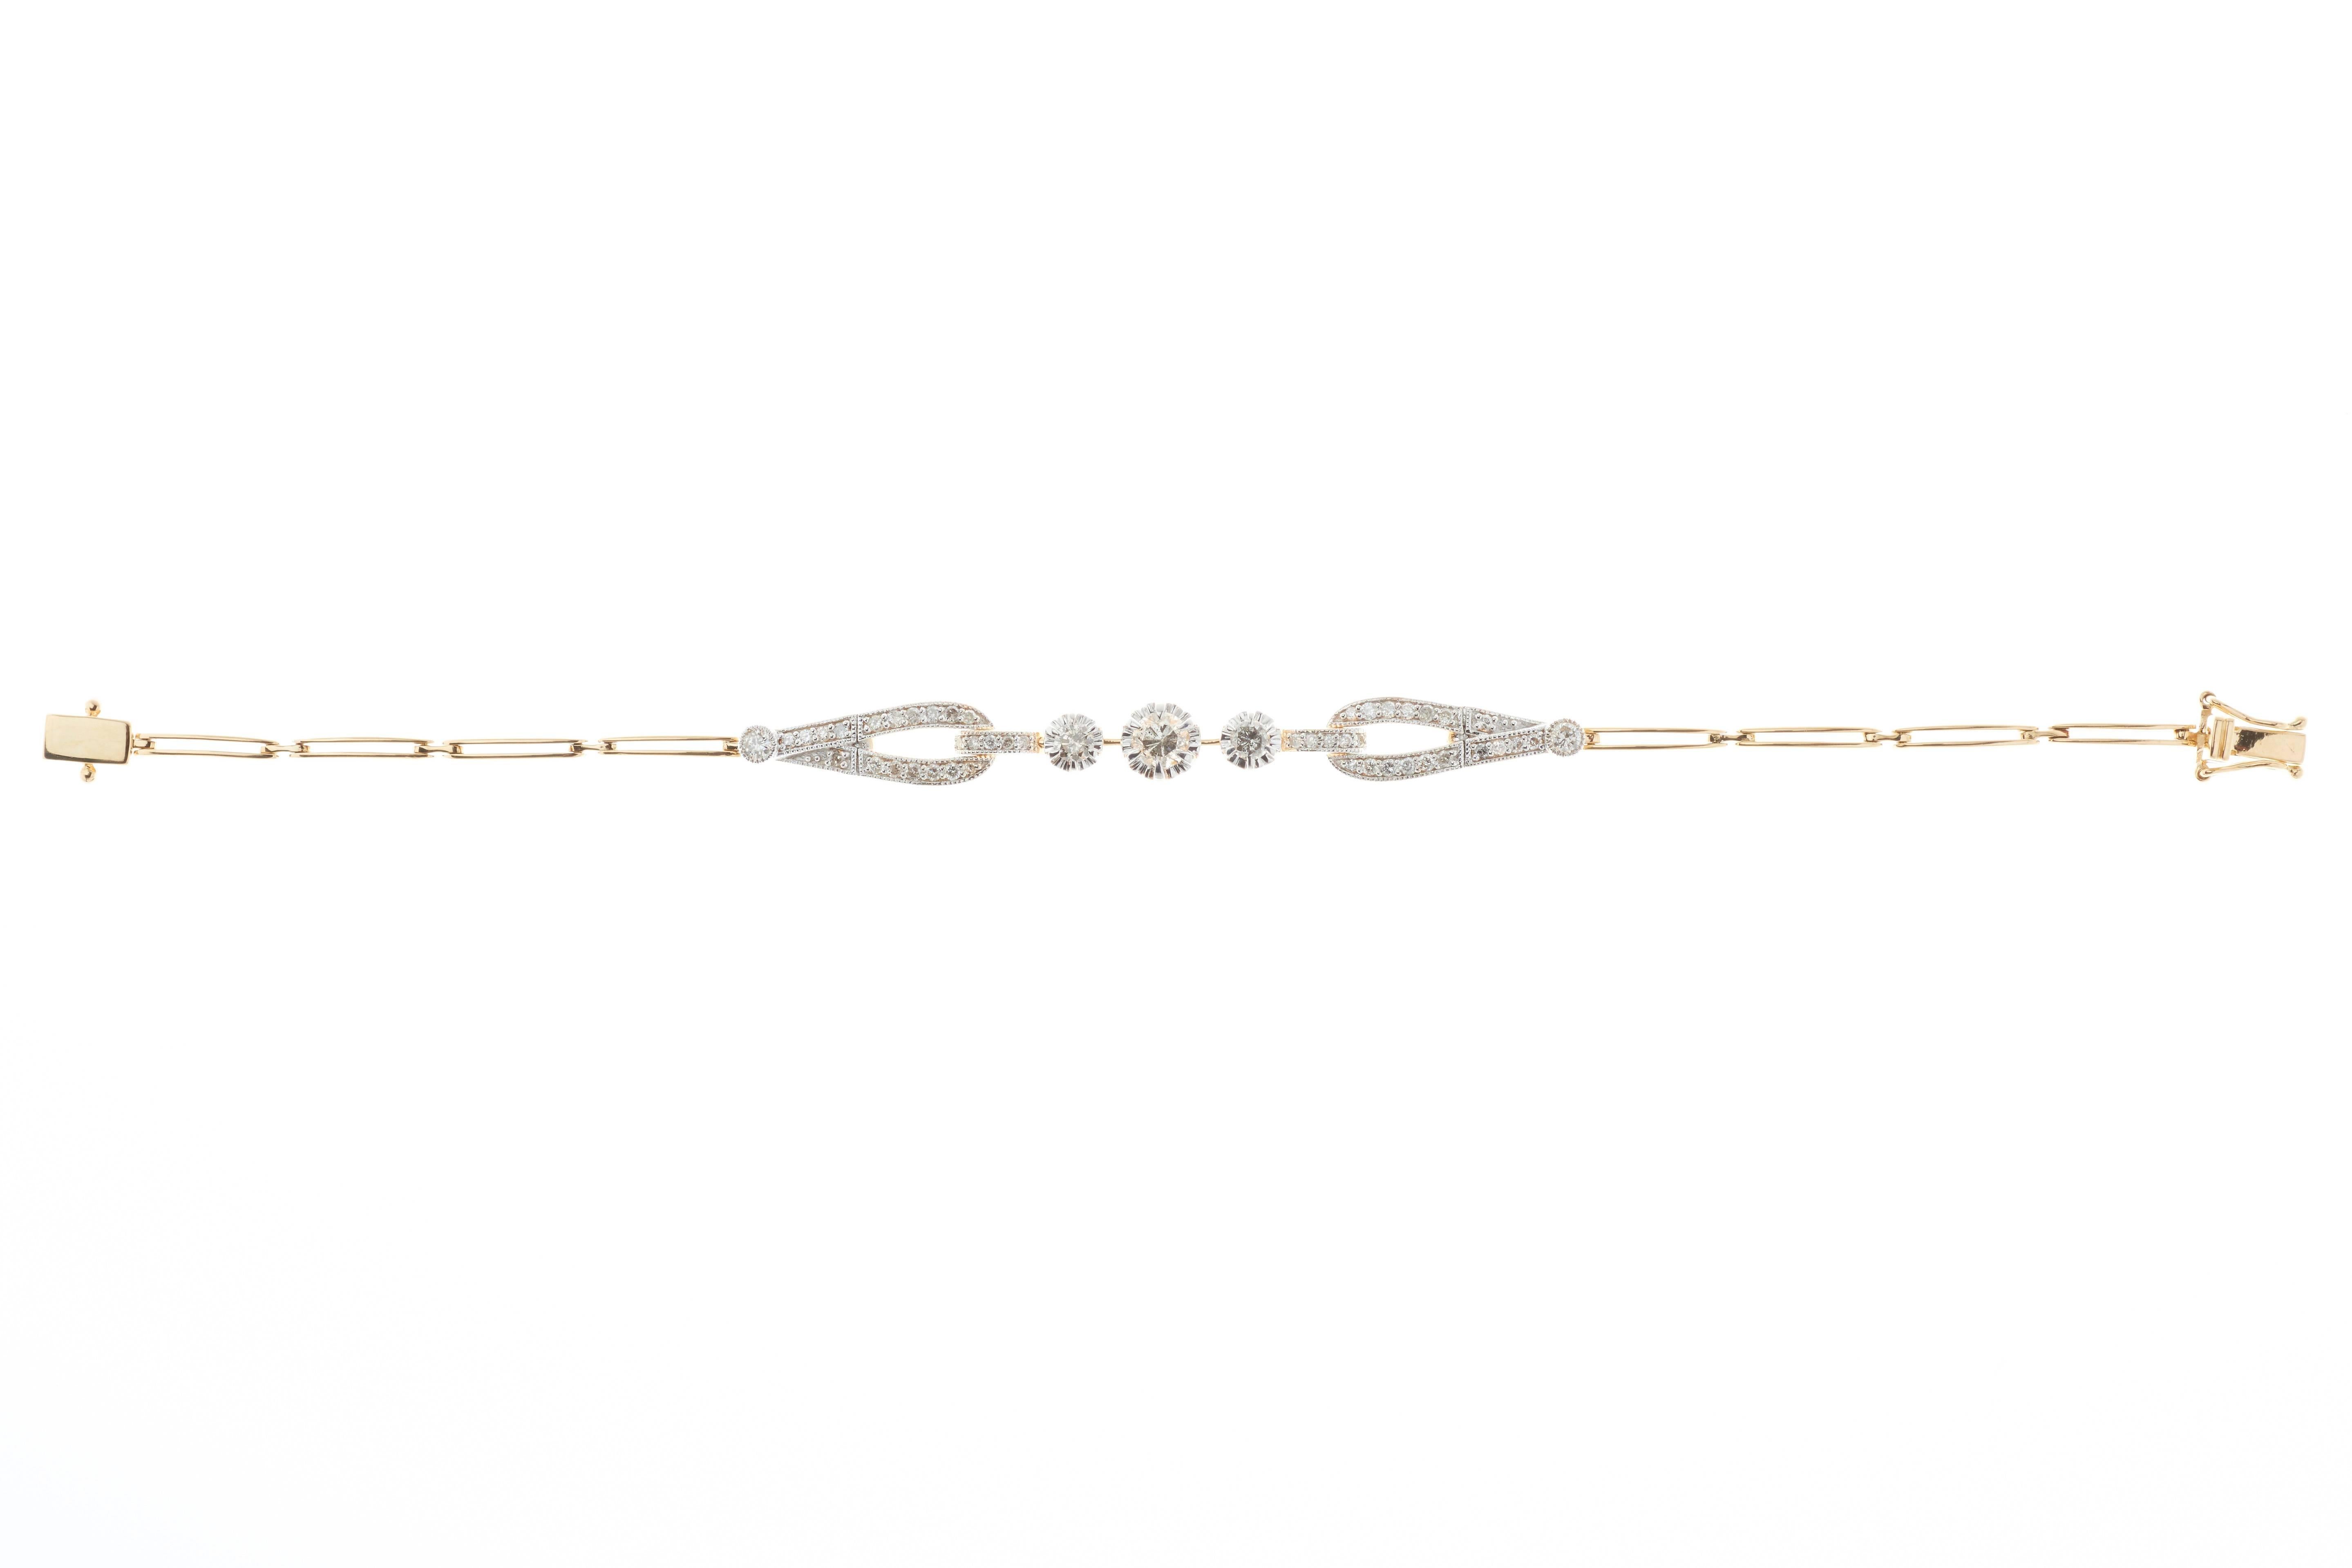 Art Deco Style Diamond Bracelet by Emily Sam Collection - Designers

Diamond total 1.04 Carat all Round Brilliant:
1 Central Round Brilliant  Diamond is 0.34 Carat
2 Shoulder Diamonds 0.22 Carat
46 Diamonds 0.48 Carat
18 Carat Two Tone Yellow and